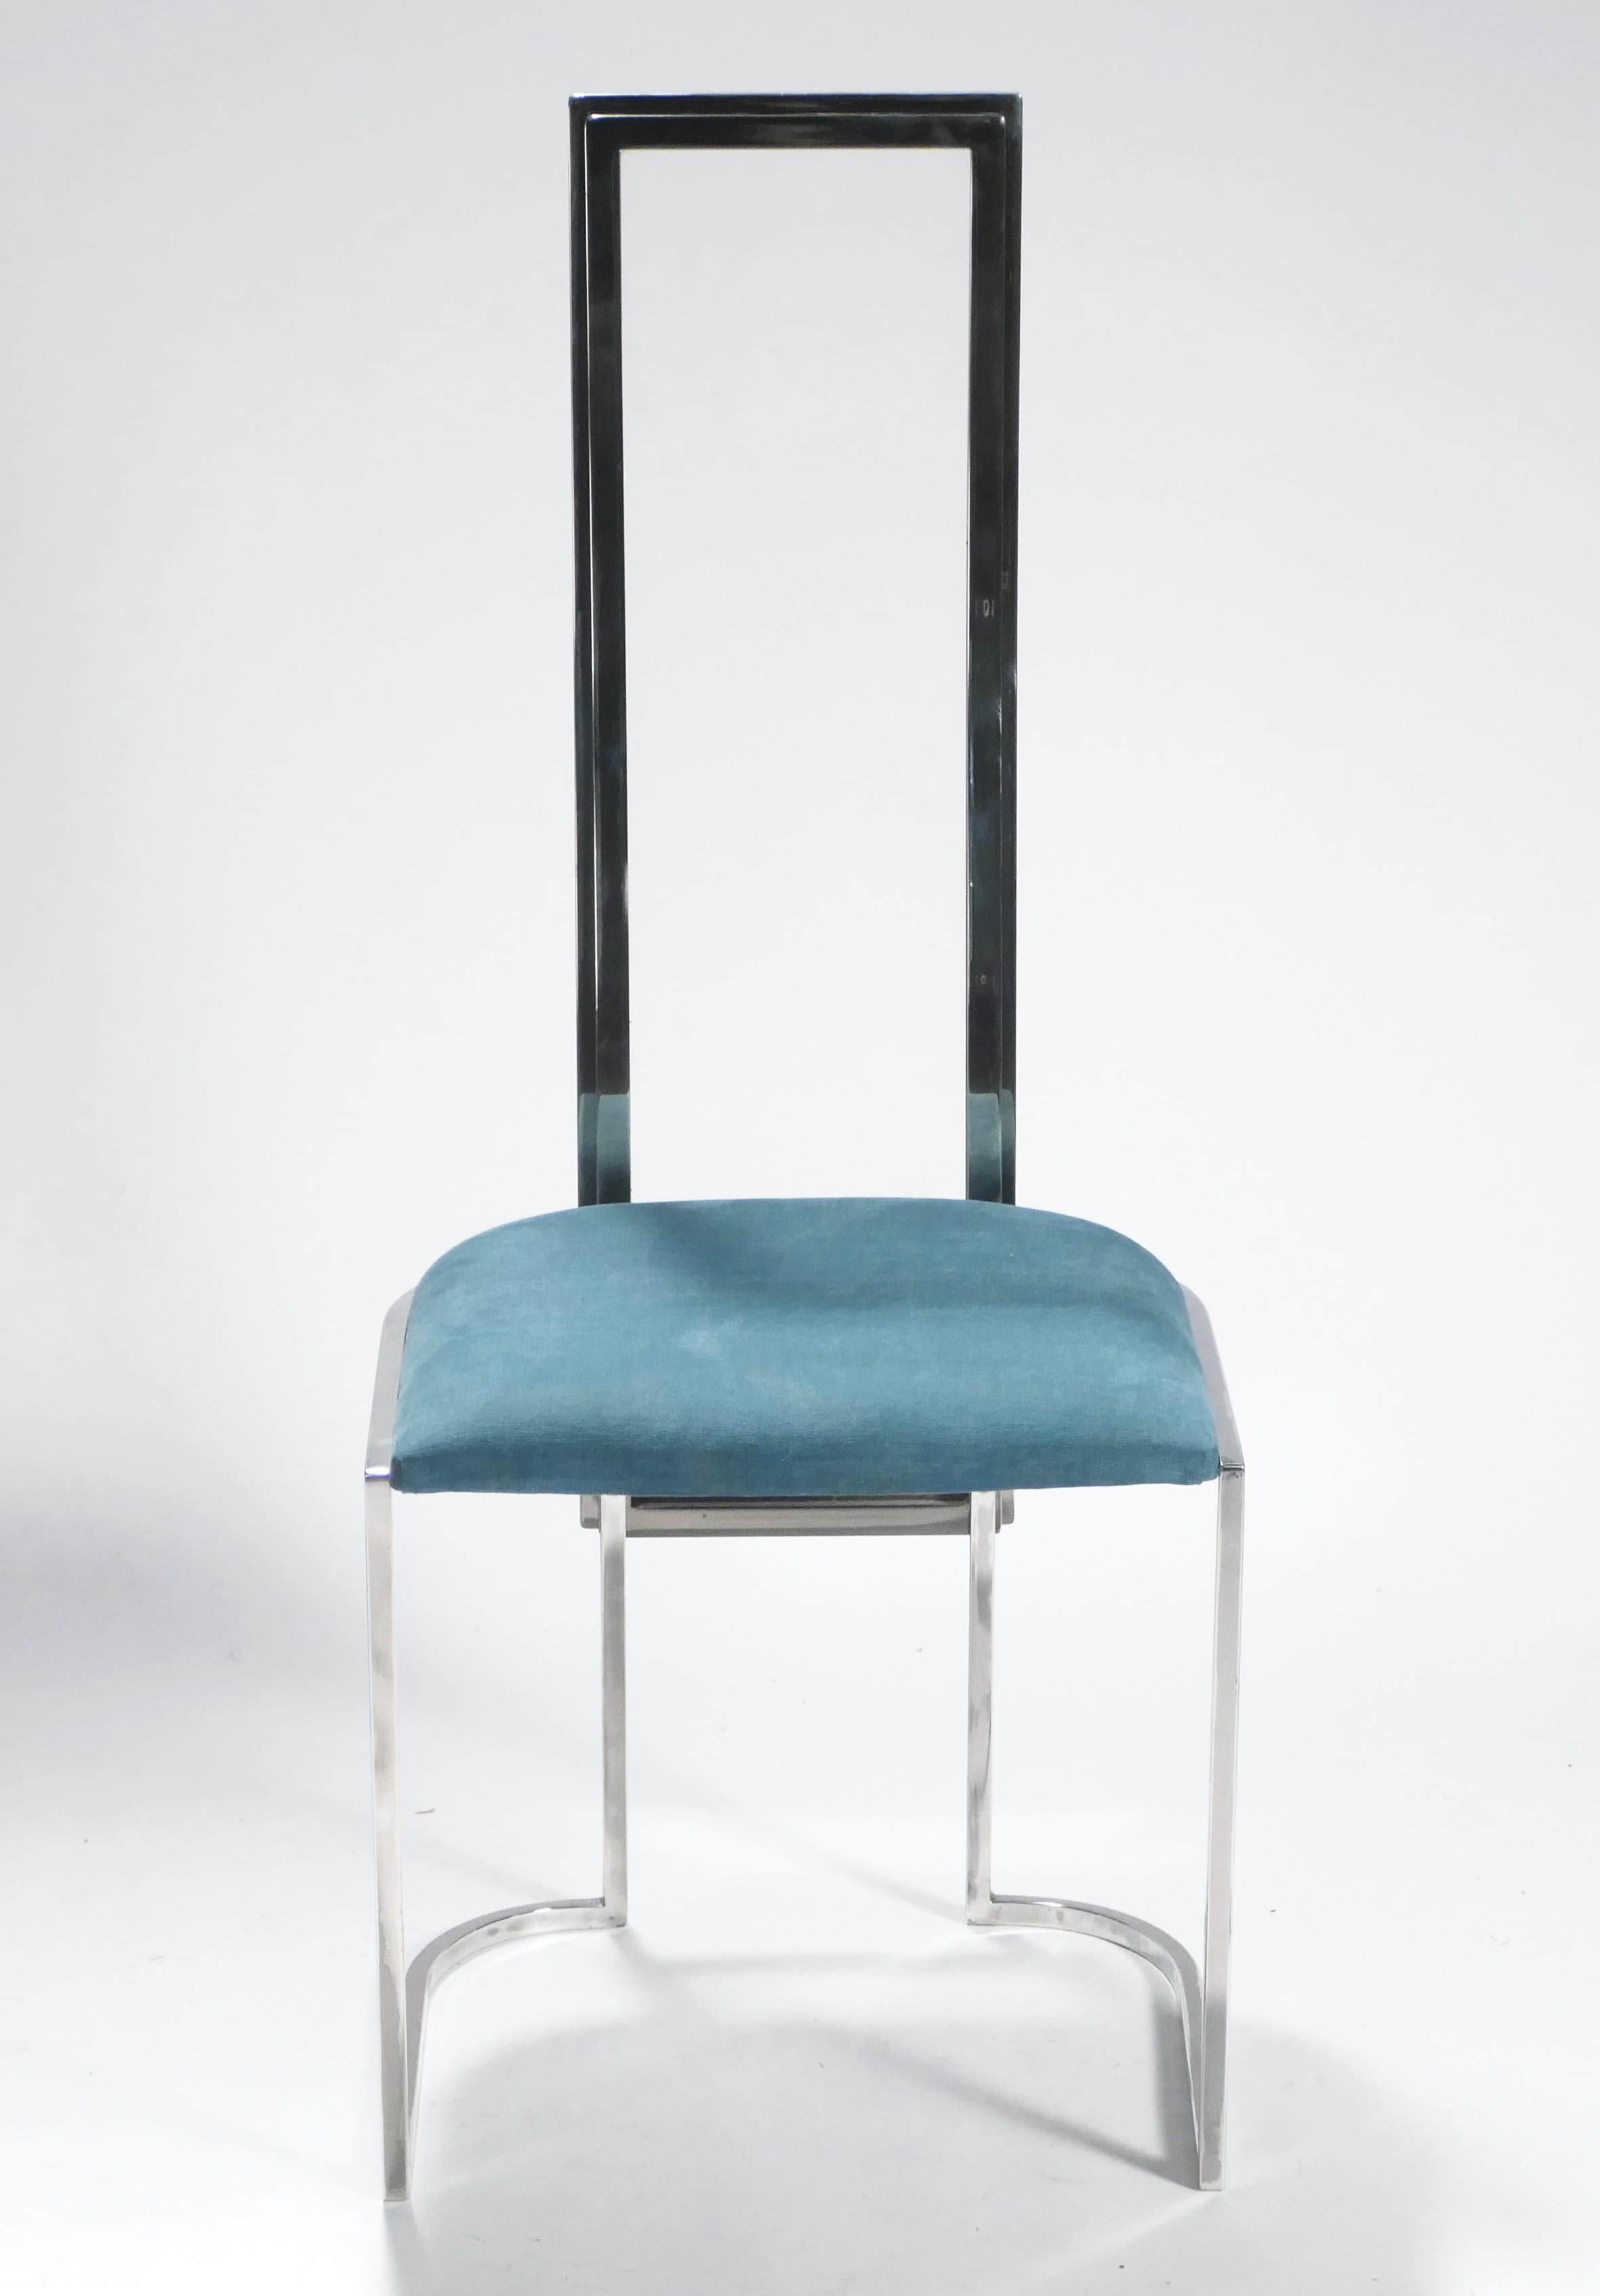 Shaped nickel metal and plexiglass Lucite form the base of these stylish Mid-Century Modern Italian chairs. The unmarred, shiny metal structure and brand-new teal upholstery in high-quality fabric mean this set has been maintained in very good